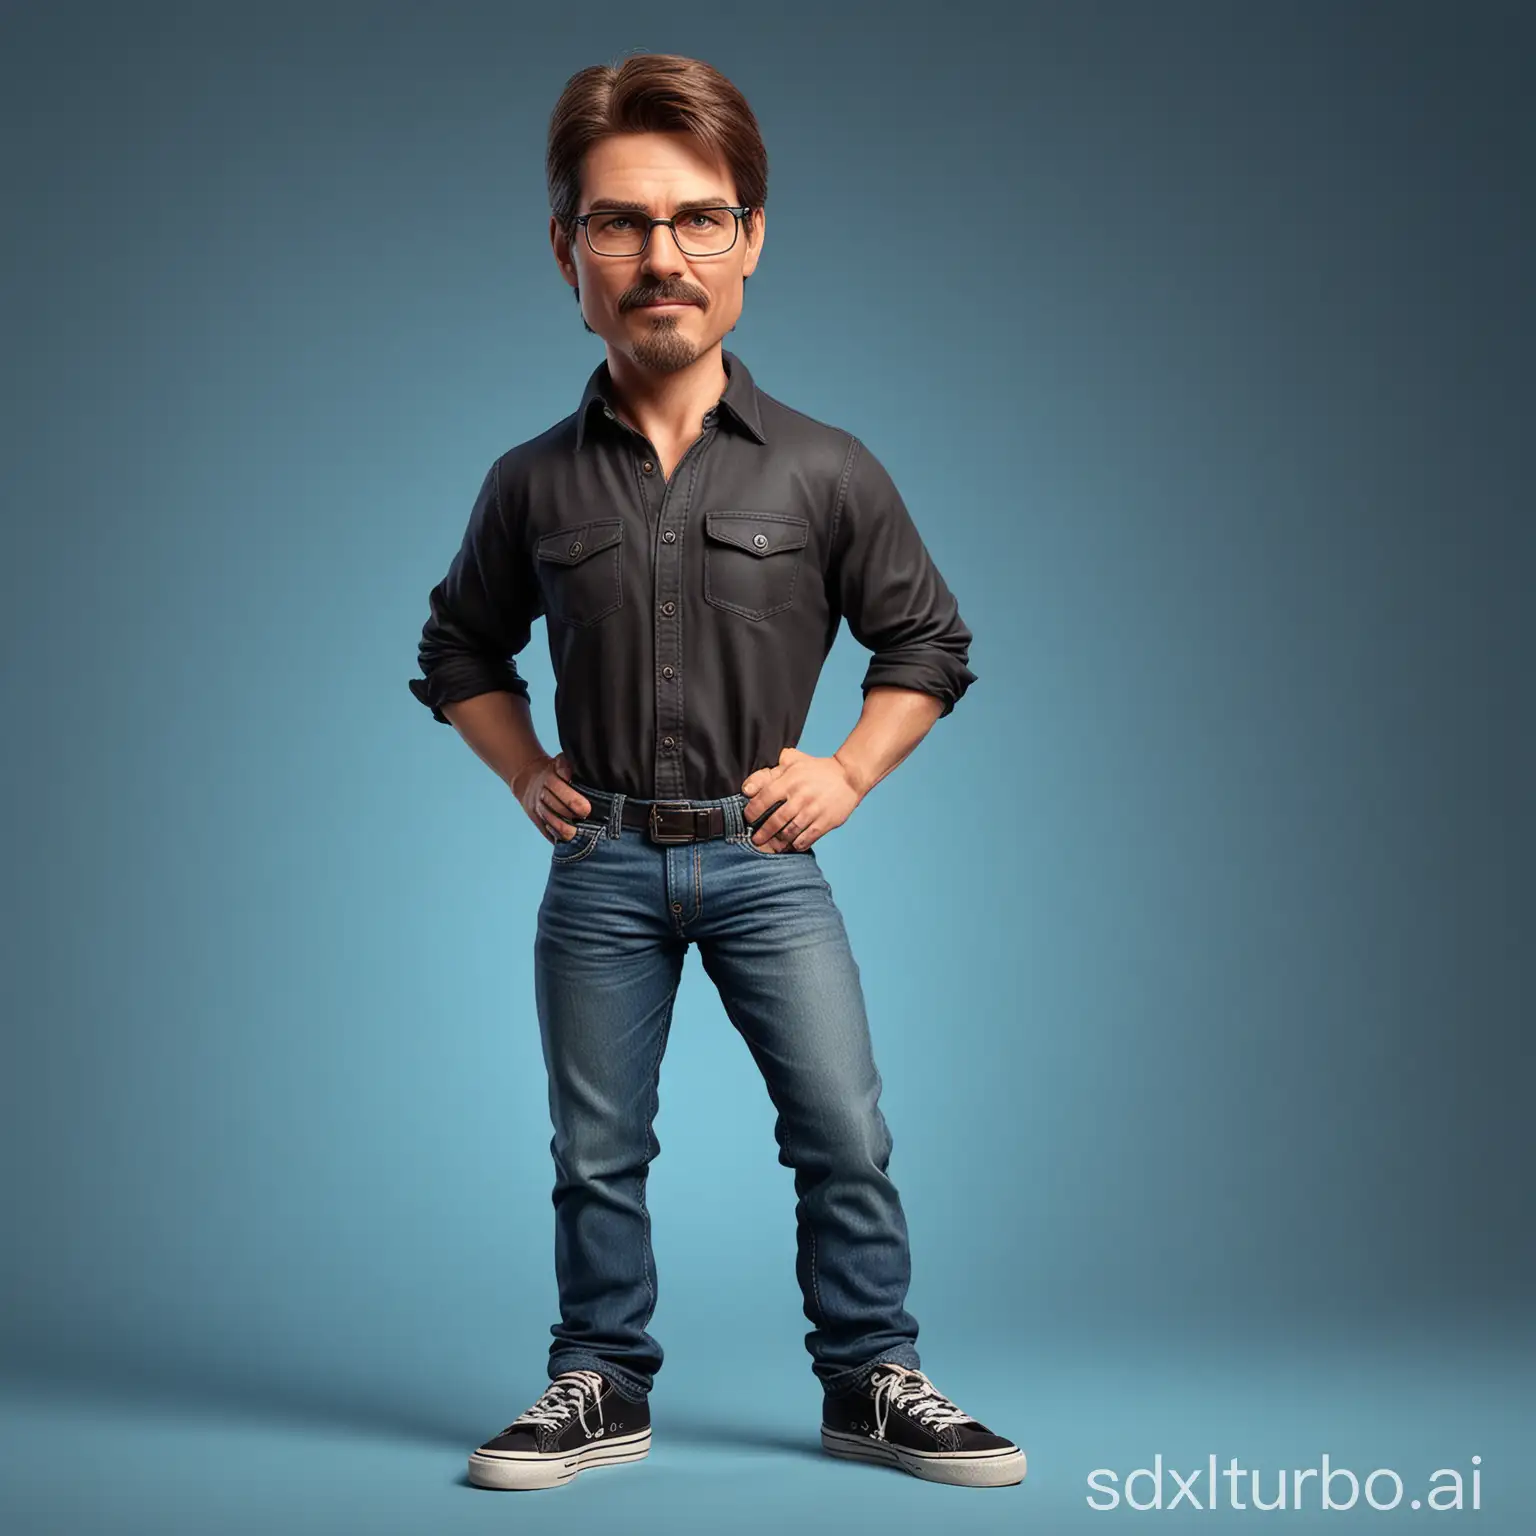 Realistic-4D-Caricature-of-Actor-Tom-Cruise-Standing-Proudly